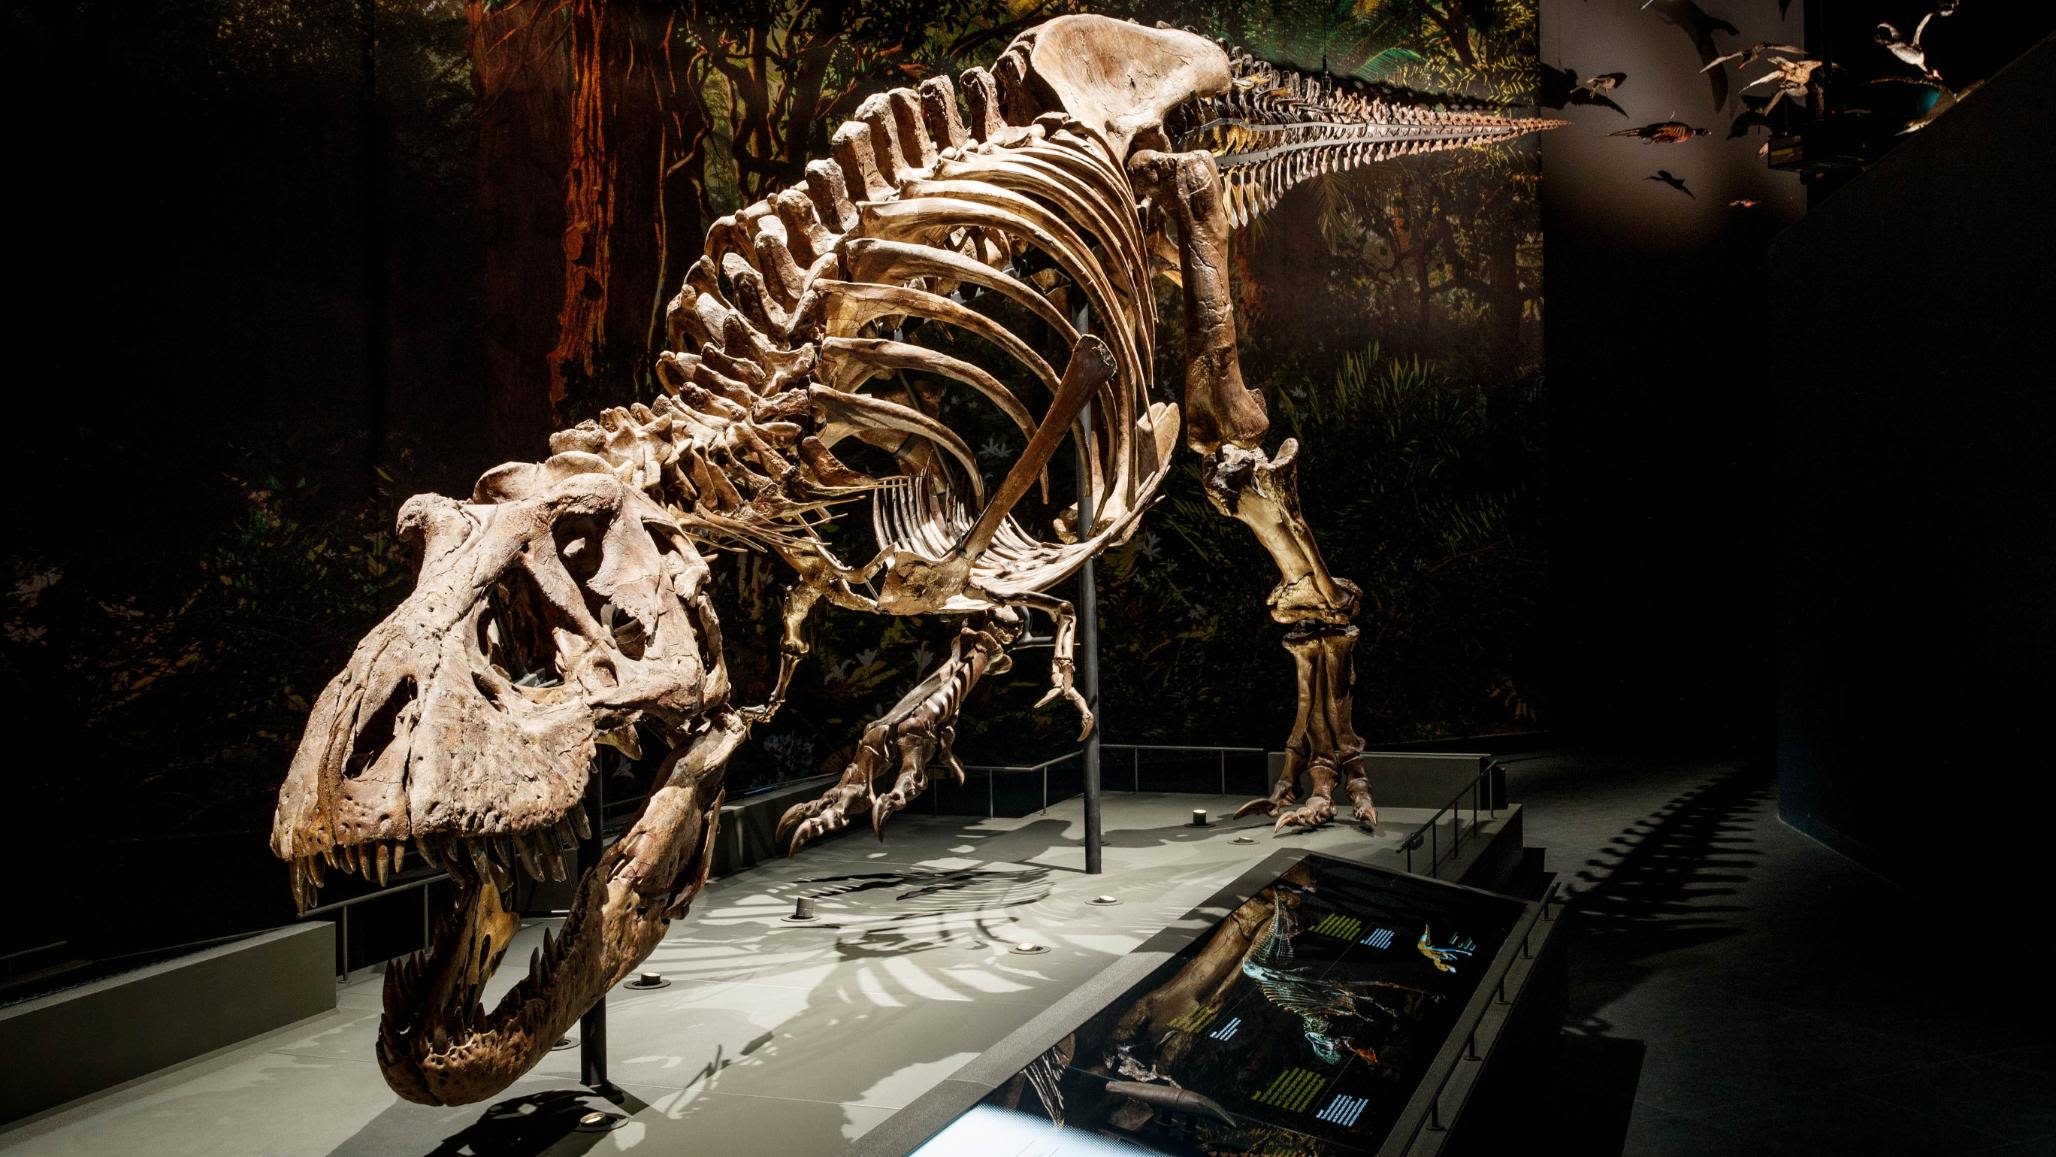 T-rex dinosaur could not have run at high speed, says study